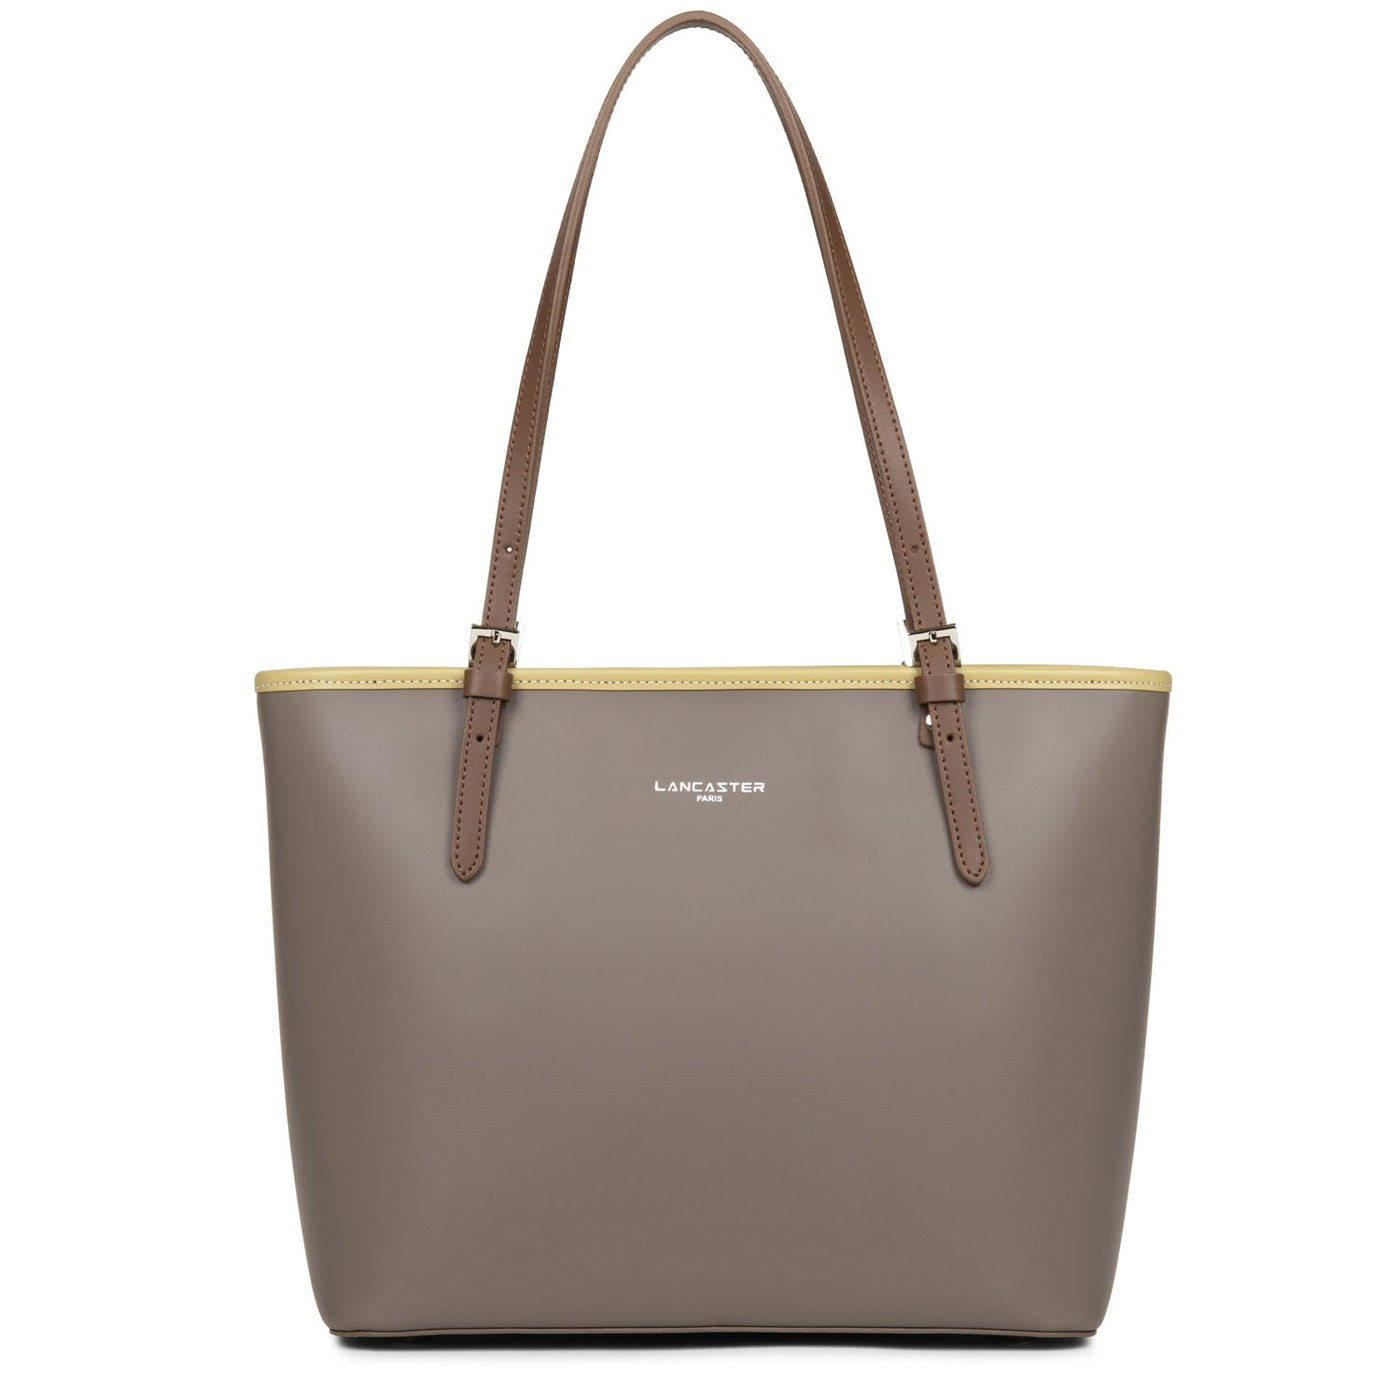 m tote bag - smooth #couleur_taupe-gingembre-vison